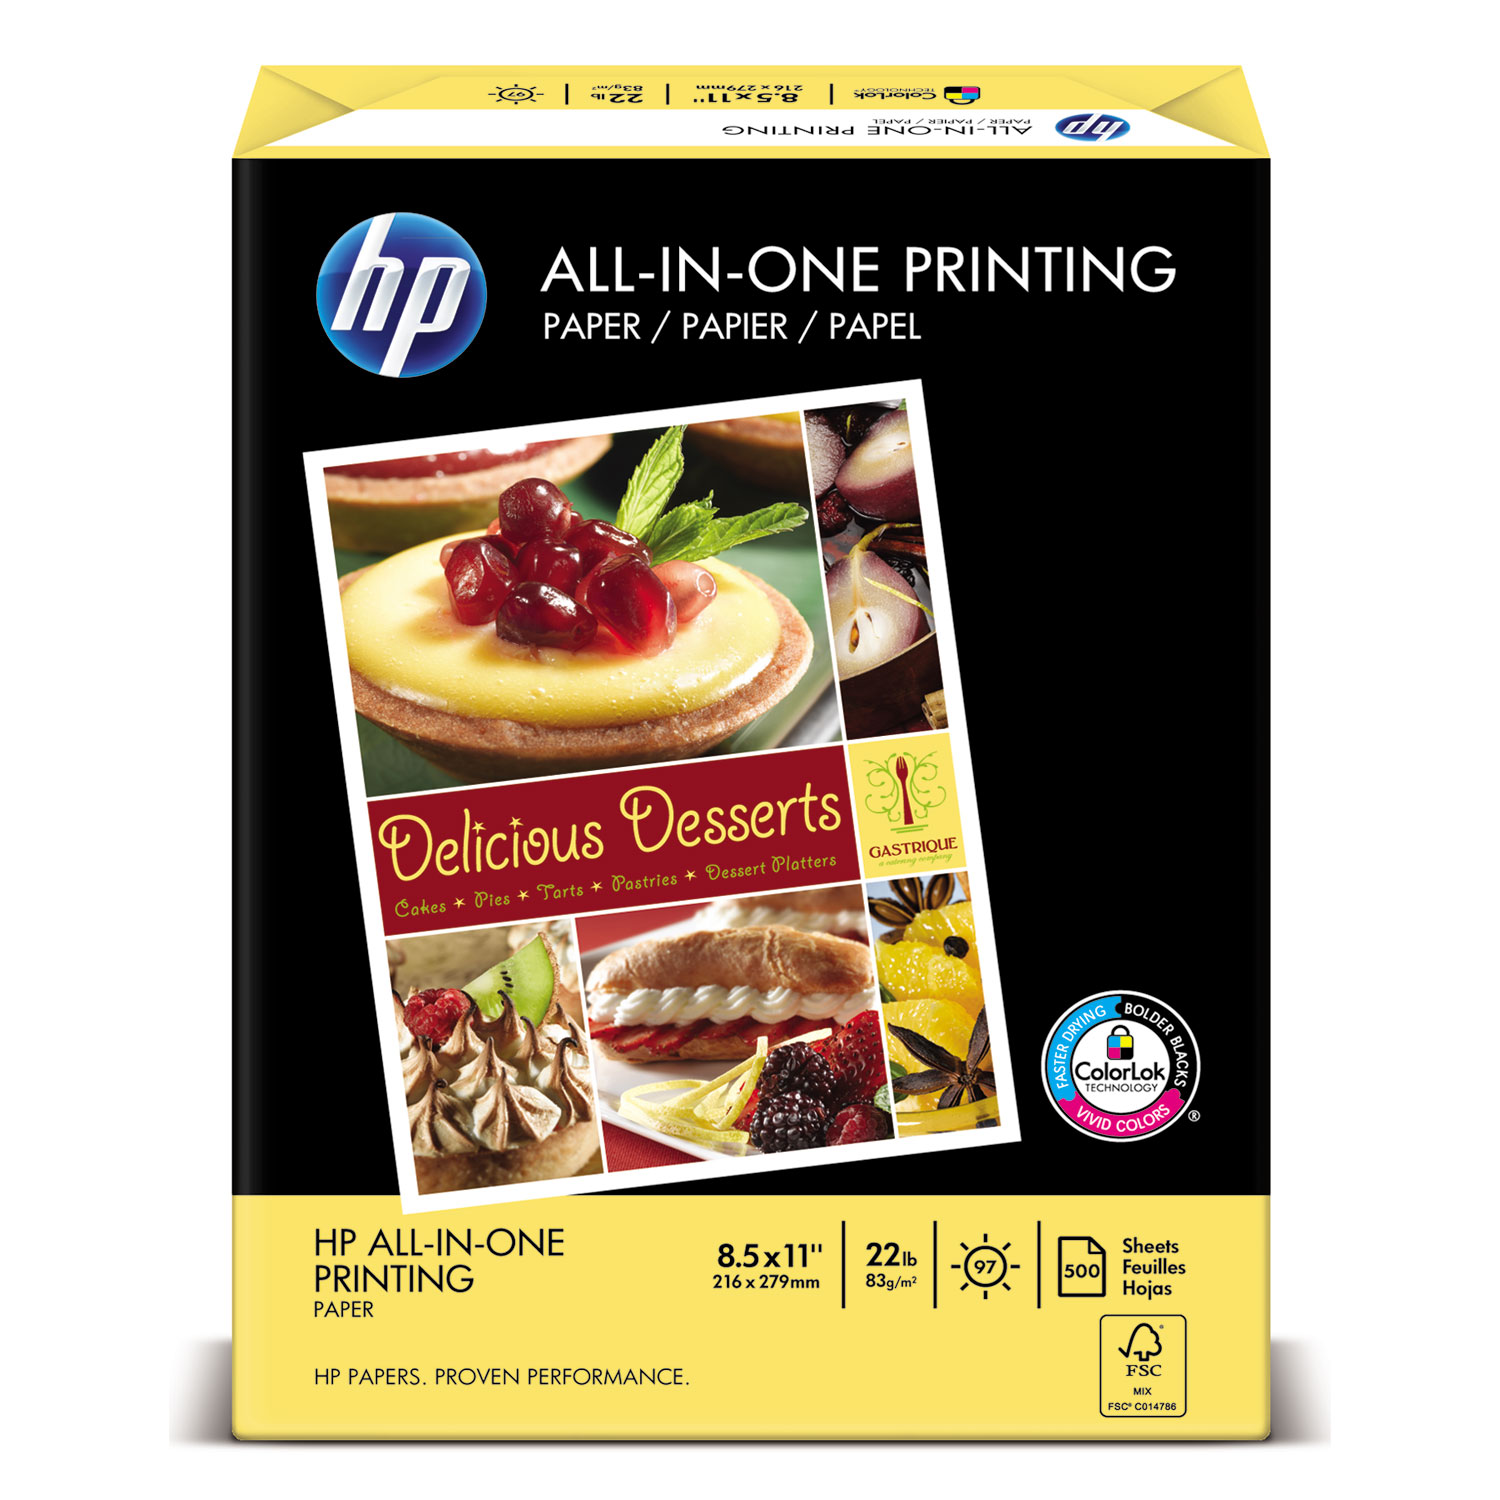  HP Papers 20700-0 All-In-One22 Paper, 97 Bright, 22lb, 8.5 x 11, White, 500/Ream (HEW207000) 